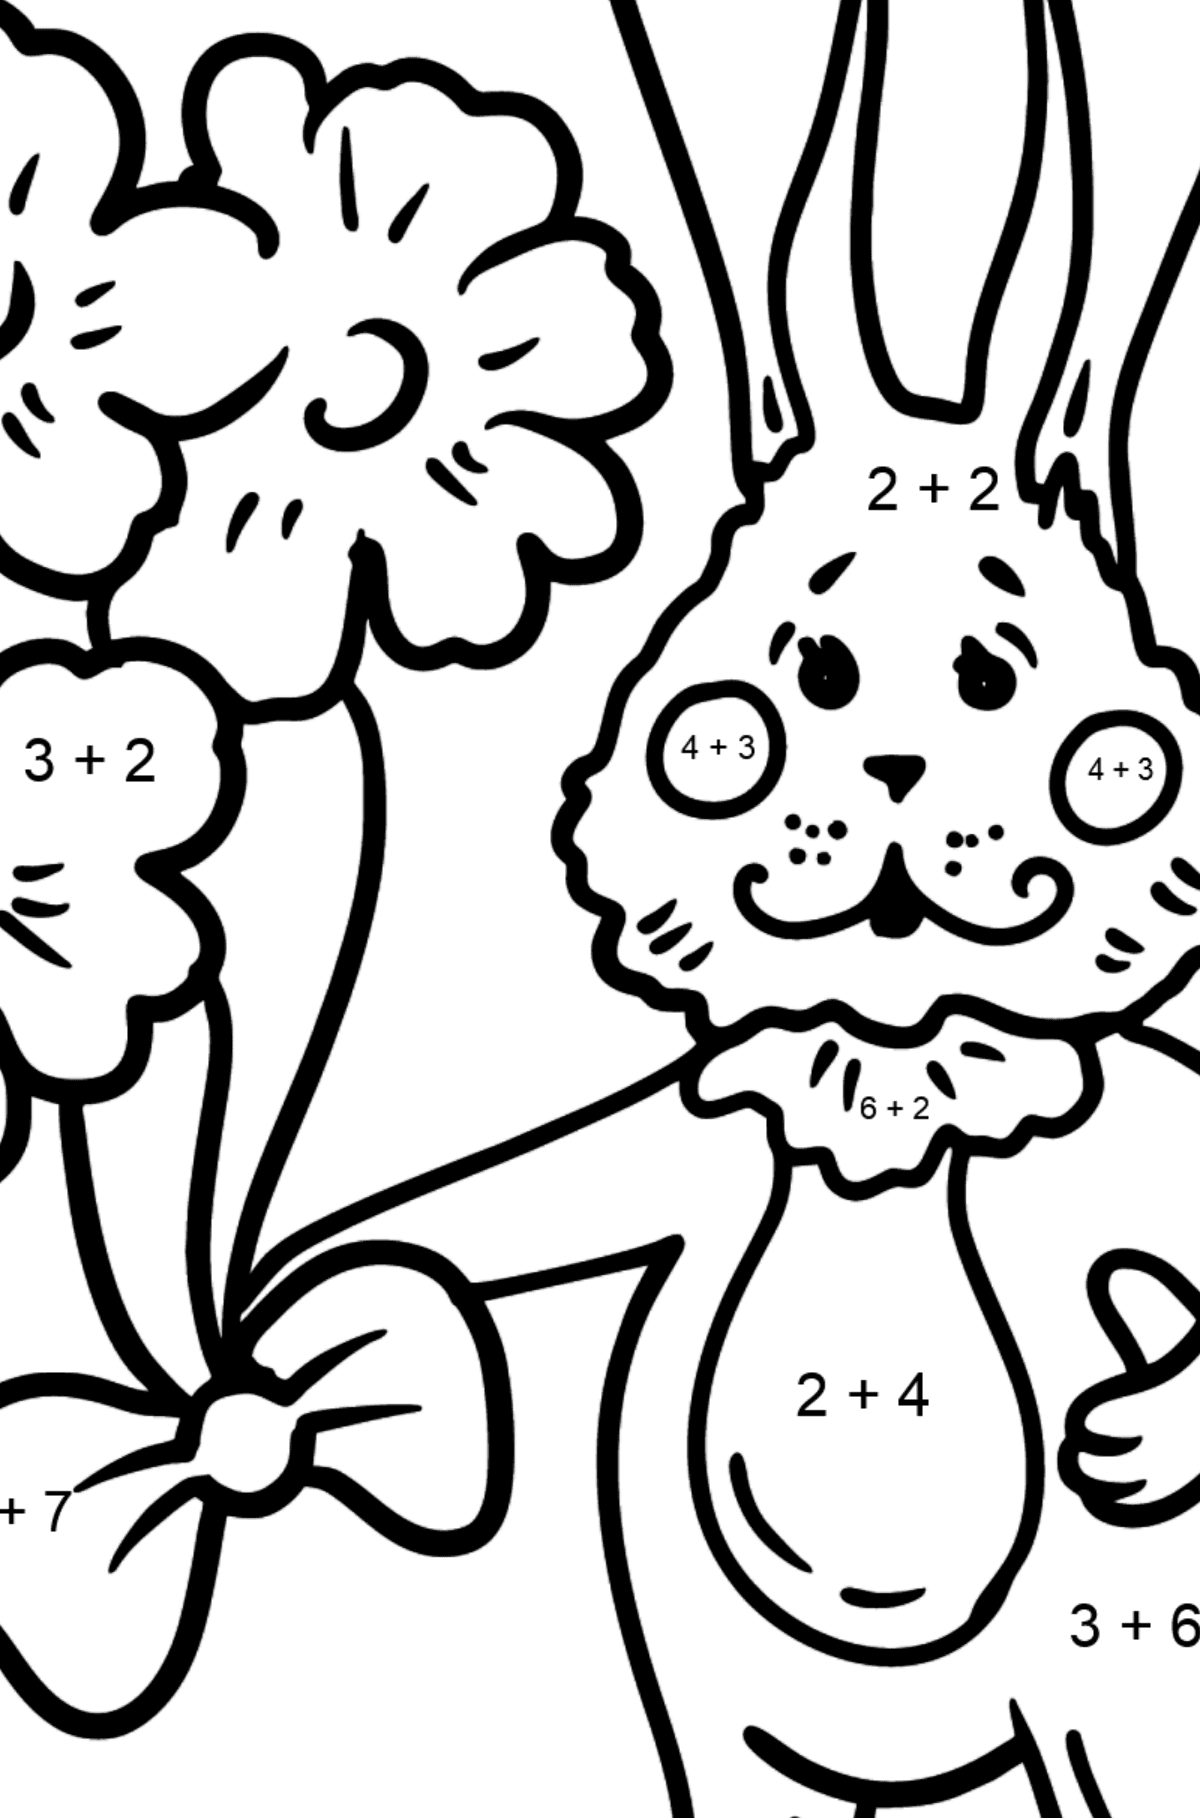 Bunny with a Bouquet of Flowers coloring page - Math Coloring - Addition for Kids